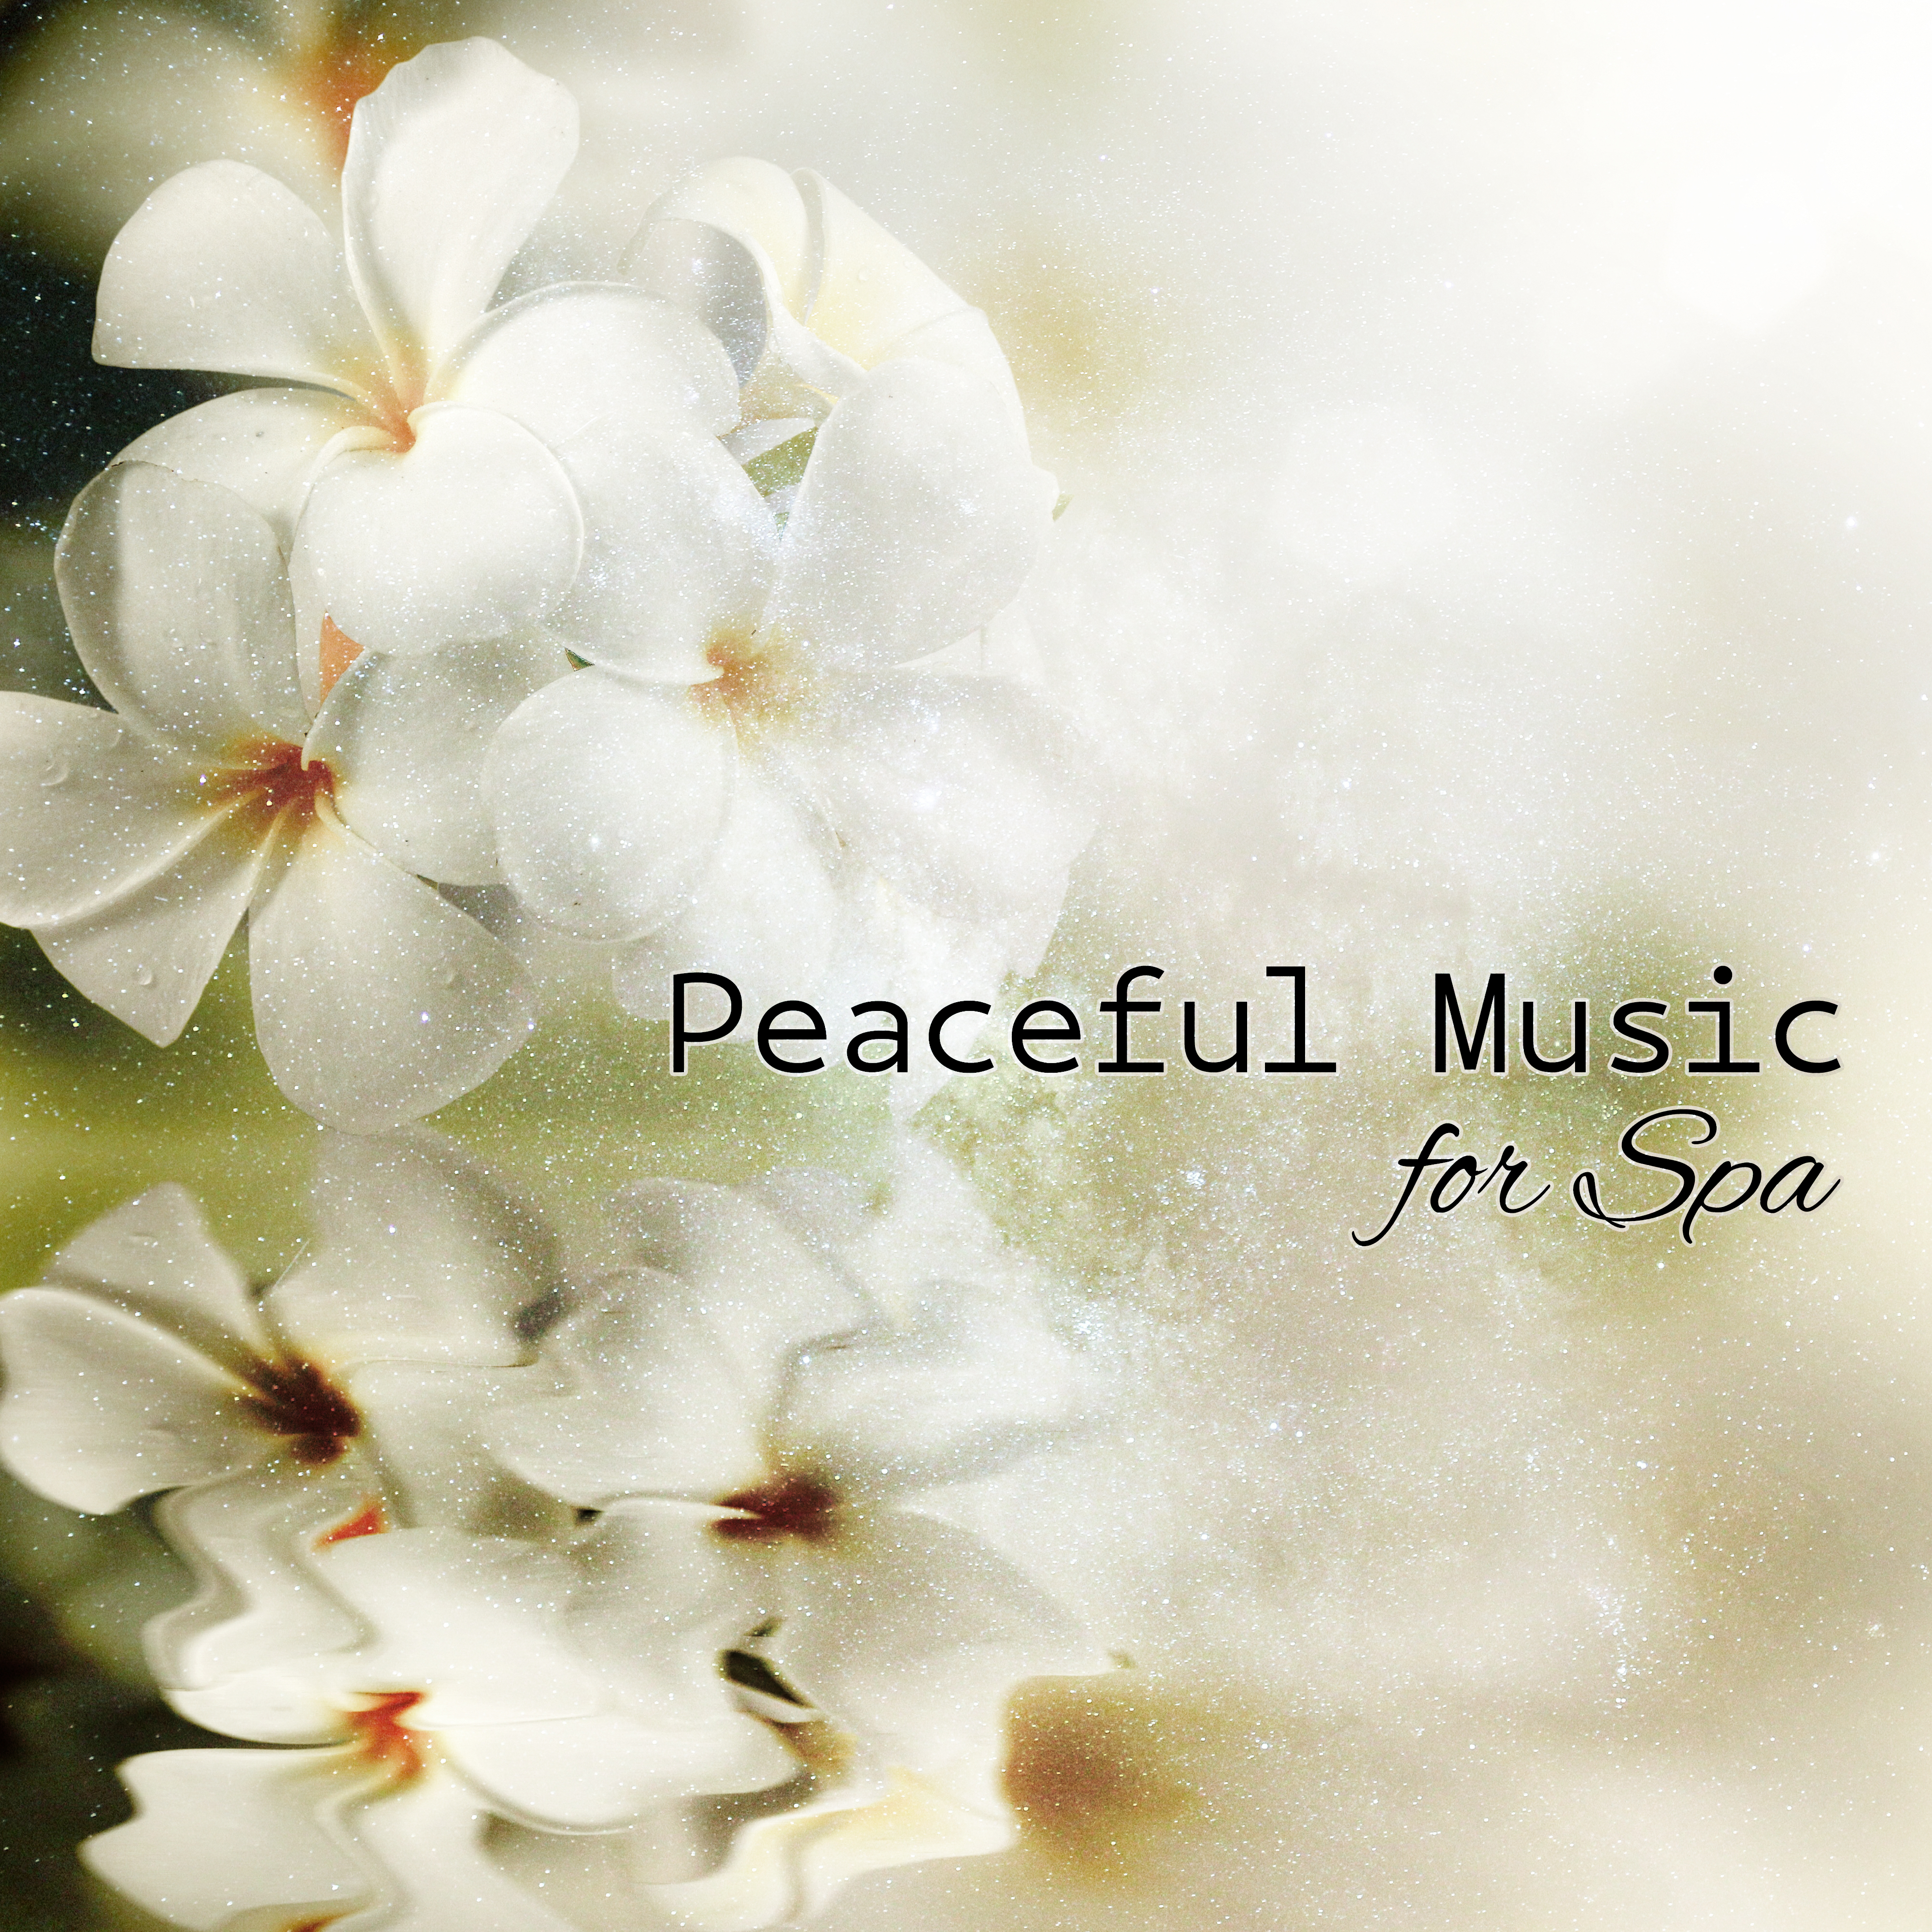 Peaceful Music for Spa  Soft Sounds for Beauty, Healing, Pure Relaxation, Soothing Spa, Therapy Sounds, Massage Music